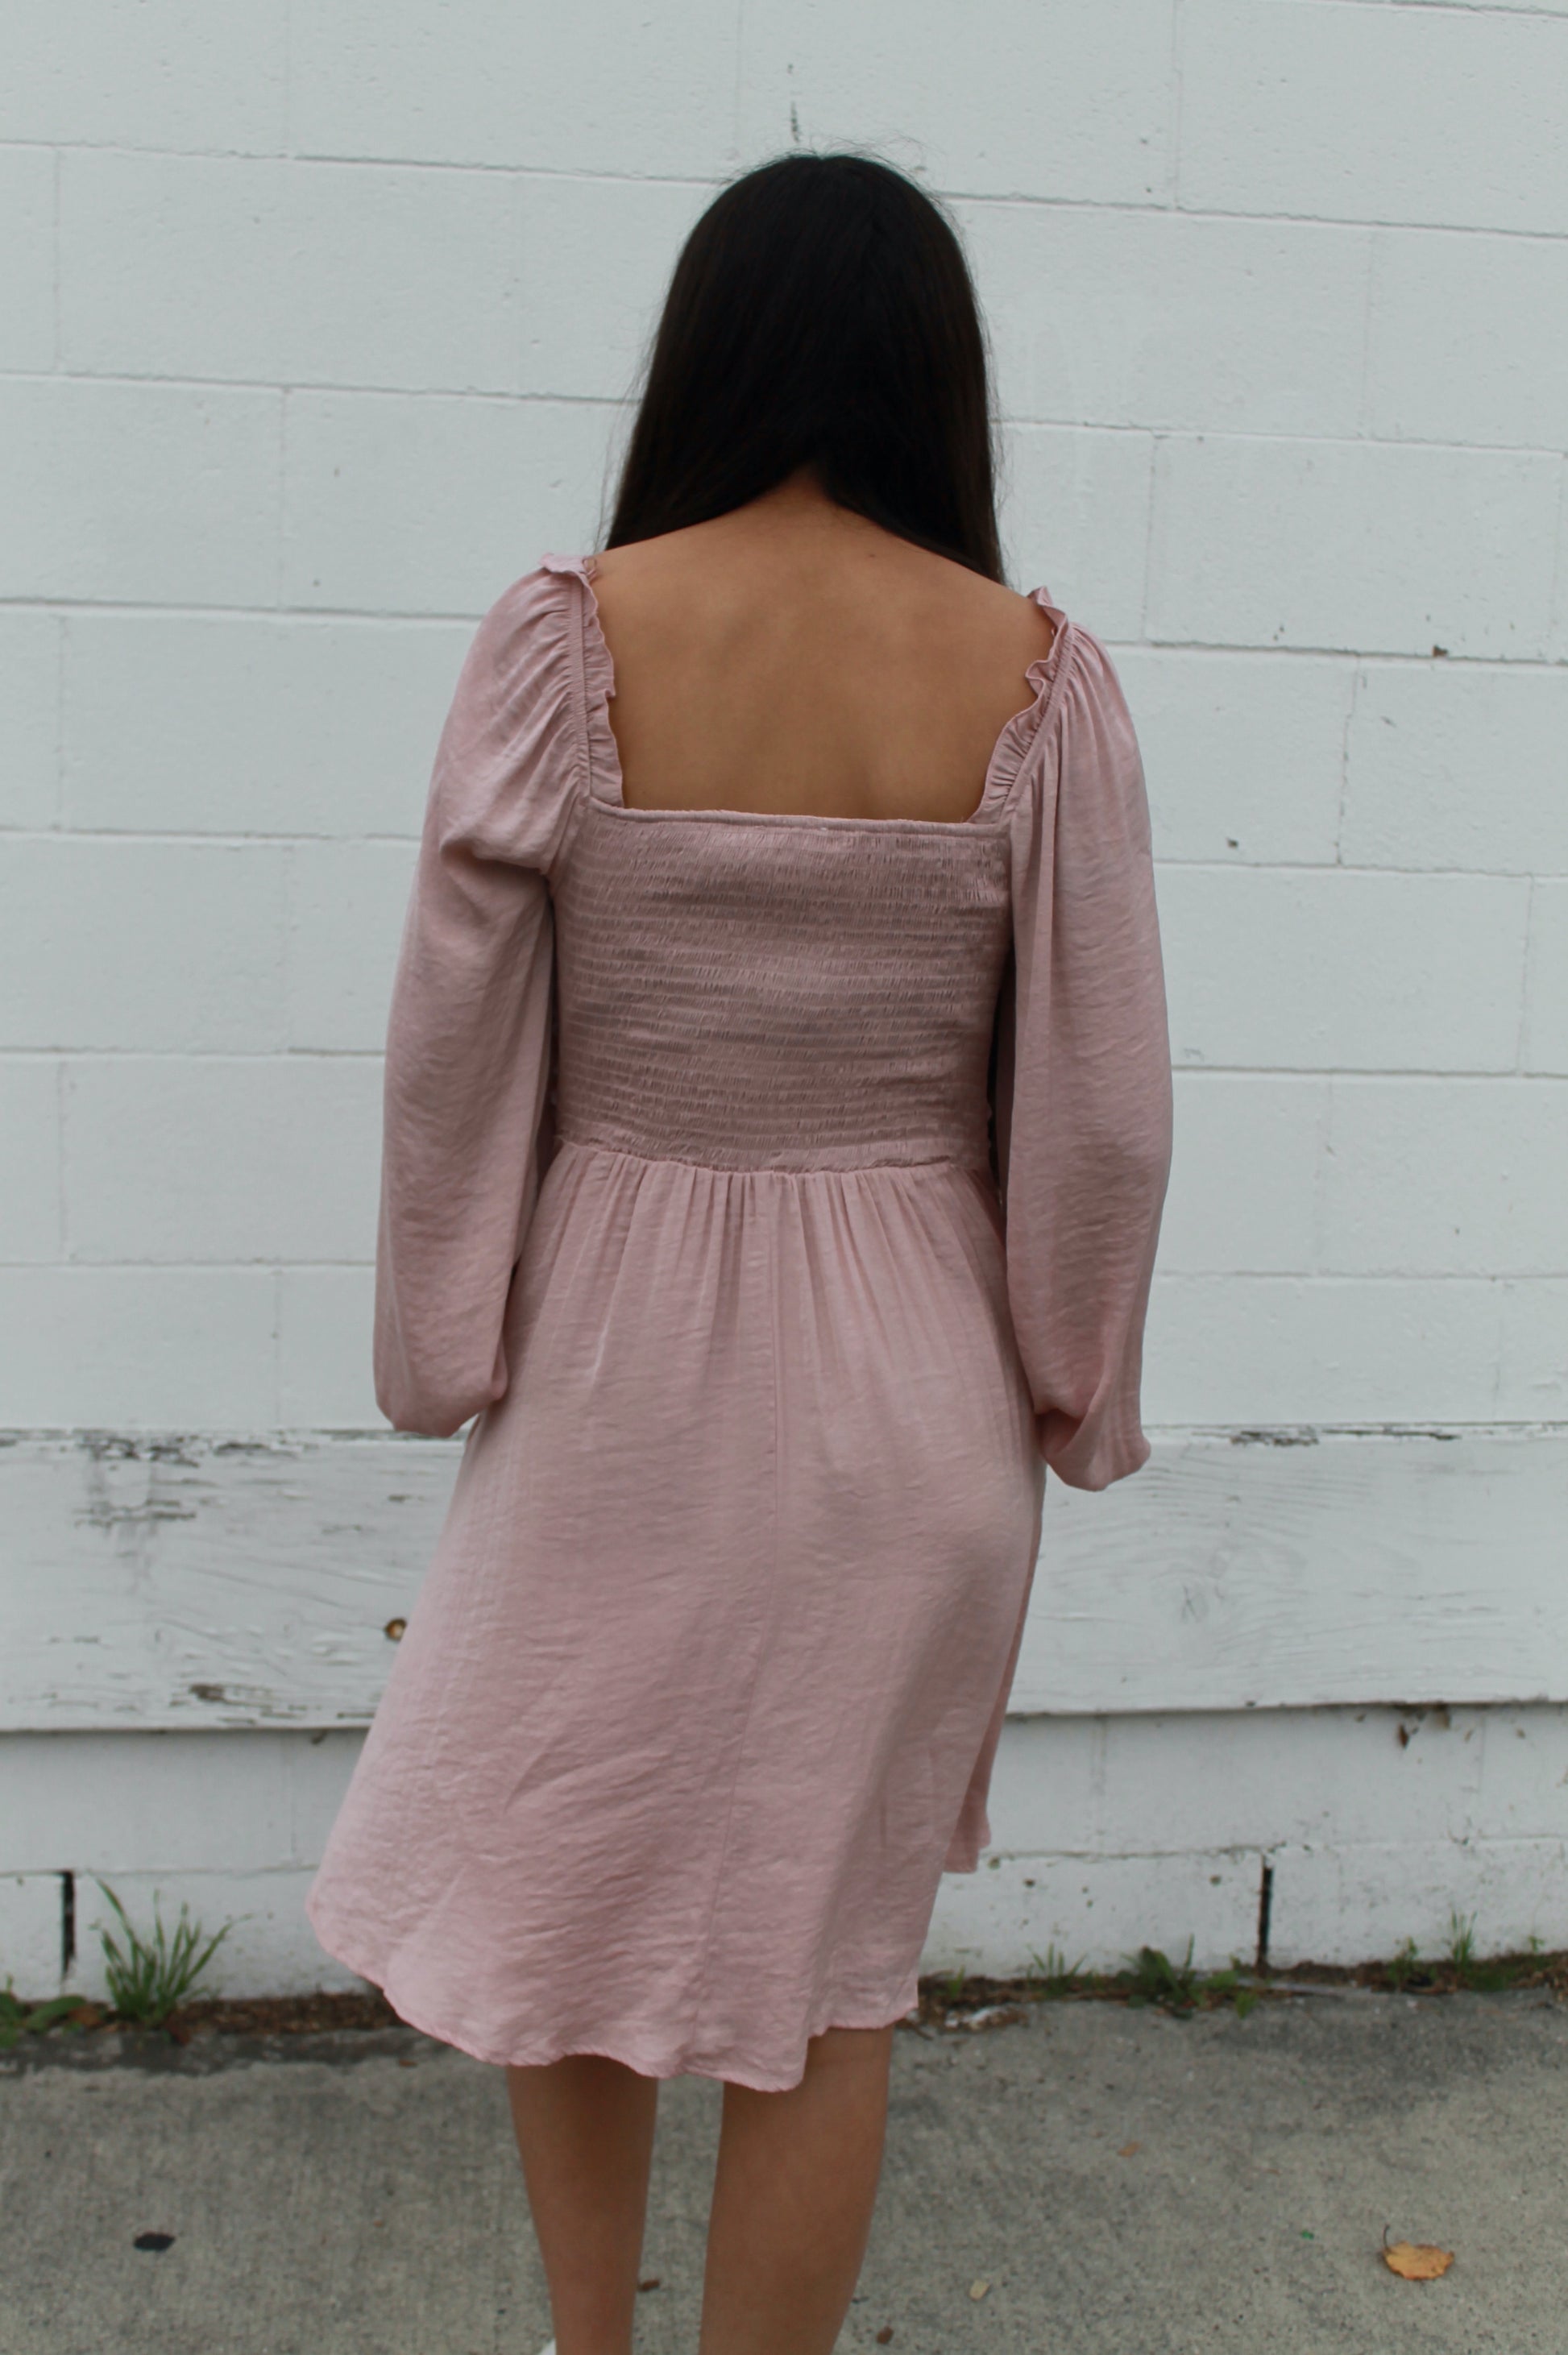 Blush pink ruffled top dress with long sleeves and pockets, knee length. Back has stretchy smock.